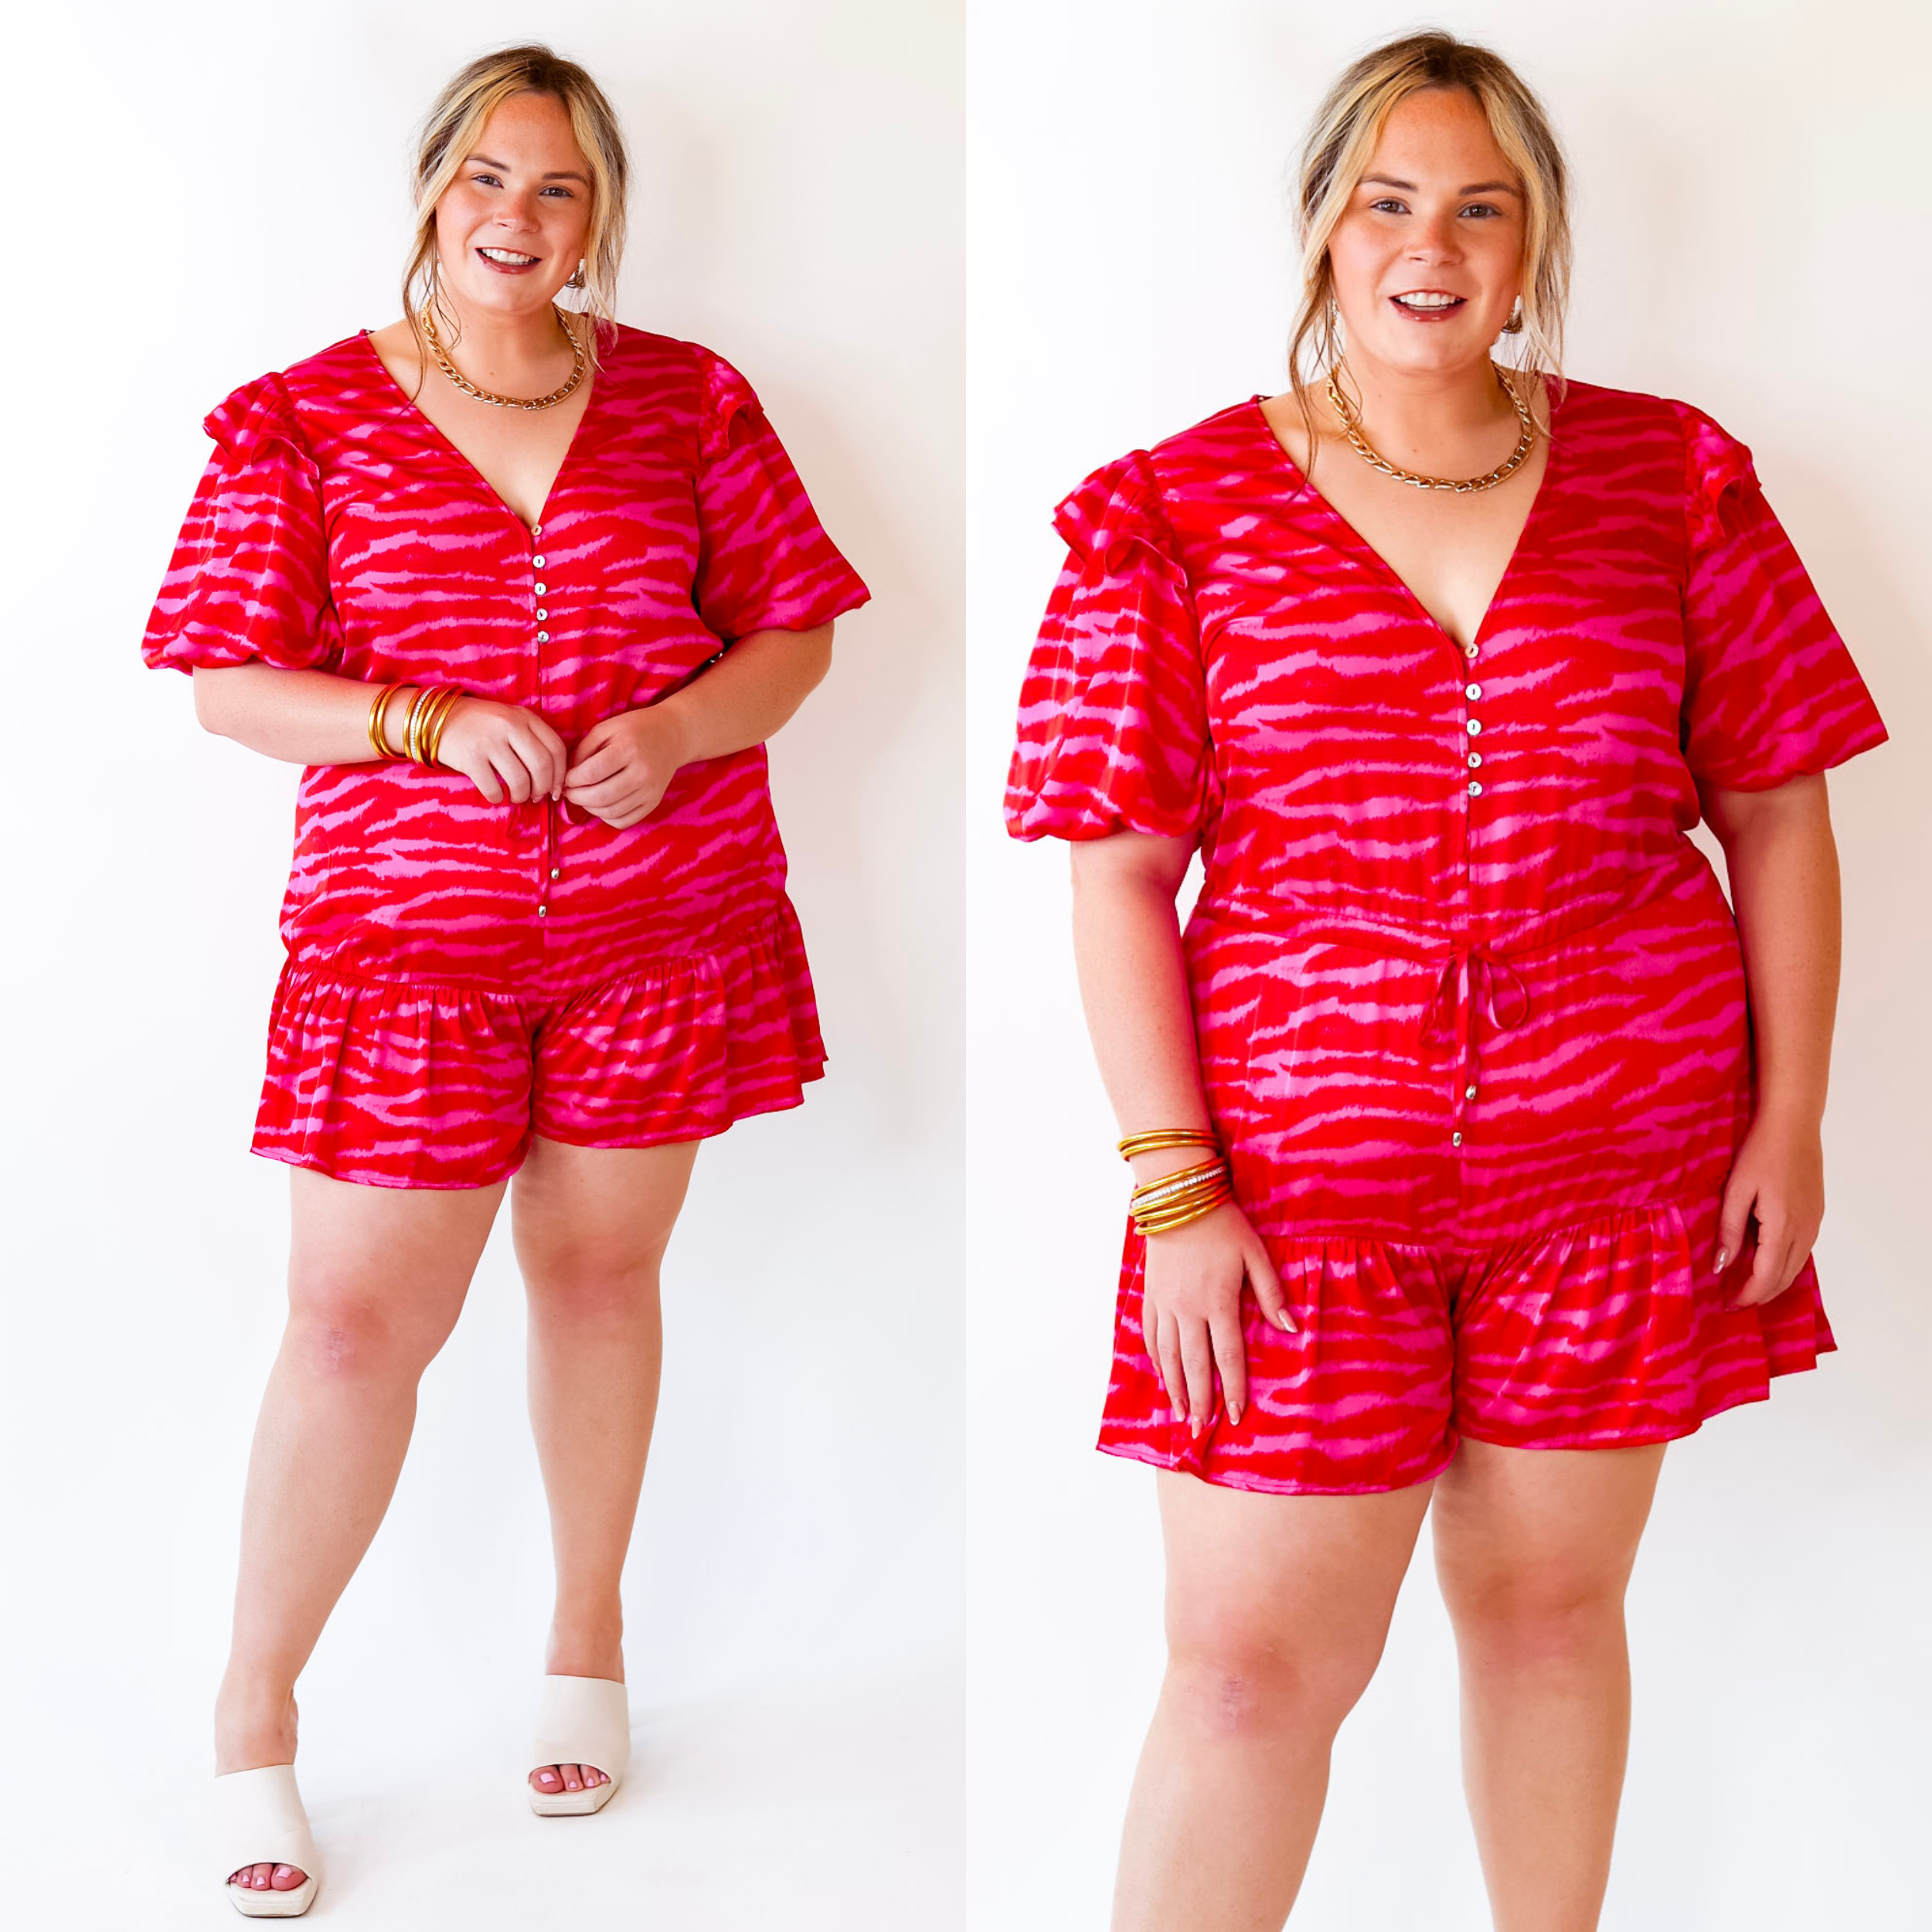 Head Turner Animal Print Romper in Pink and Red - Giddy Up Glamour Boutique